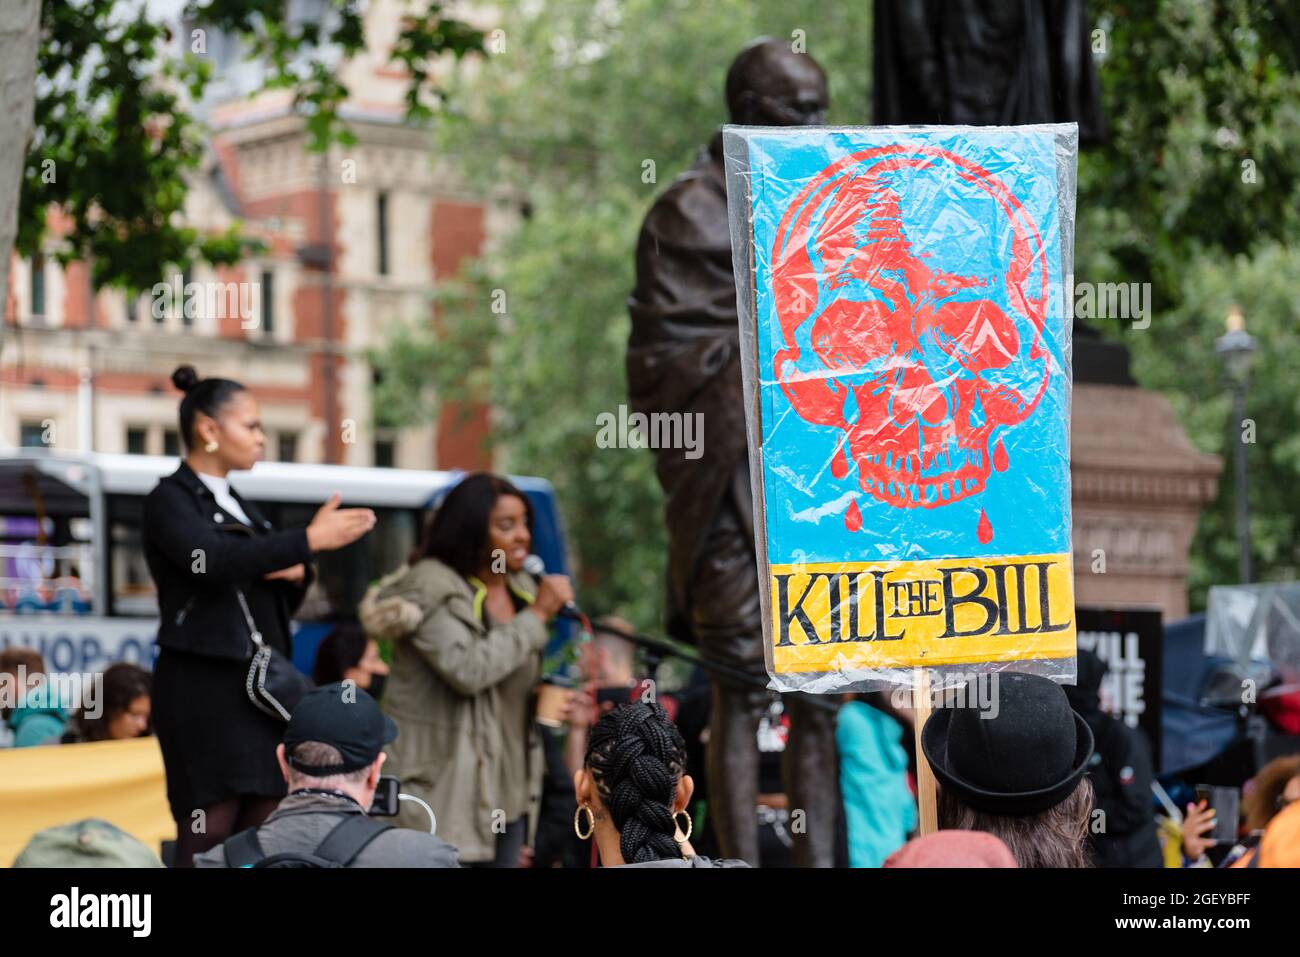 London, UK. 21 August 2021. 'Kill The Bill' protest in London against the government's proposed Police, Crime, Sentencing and Courts Bill. Stock Photo